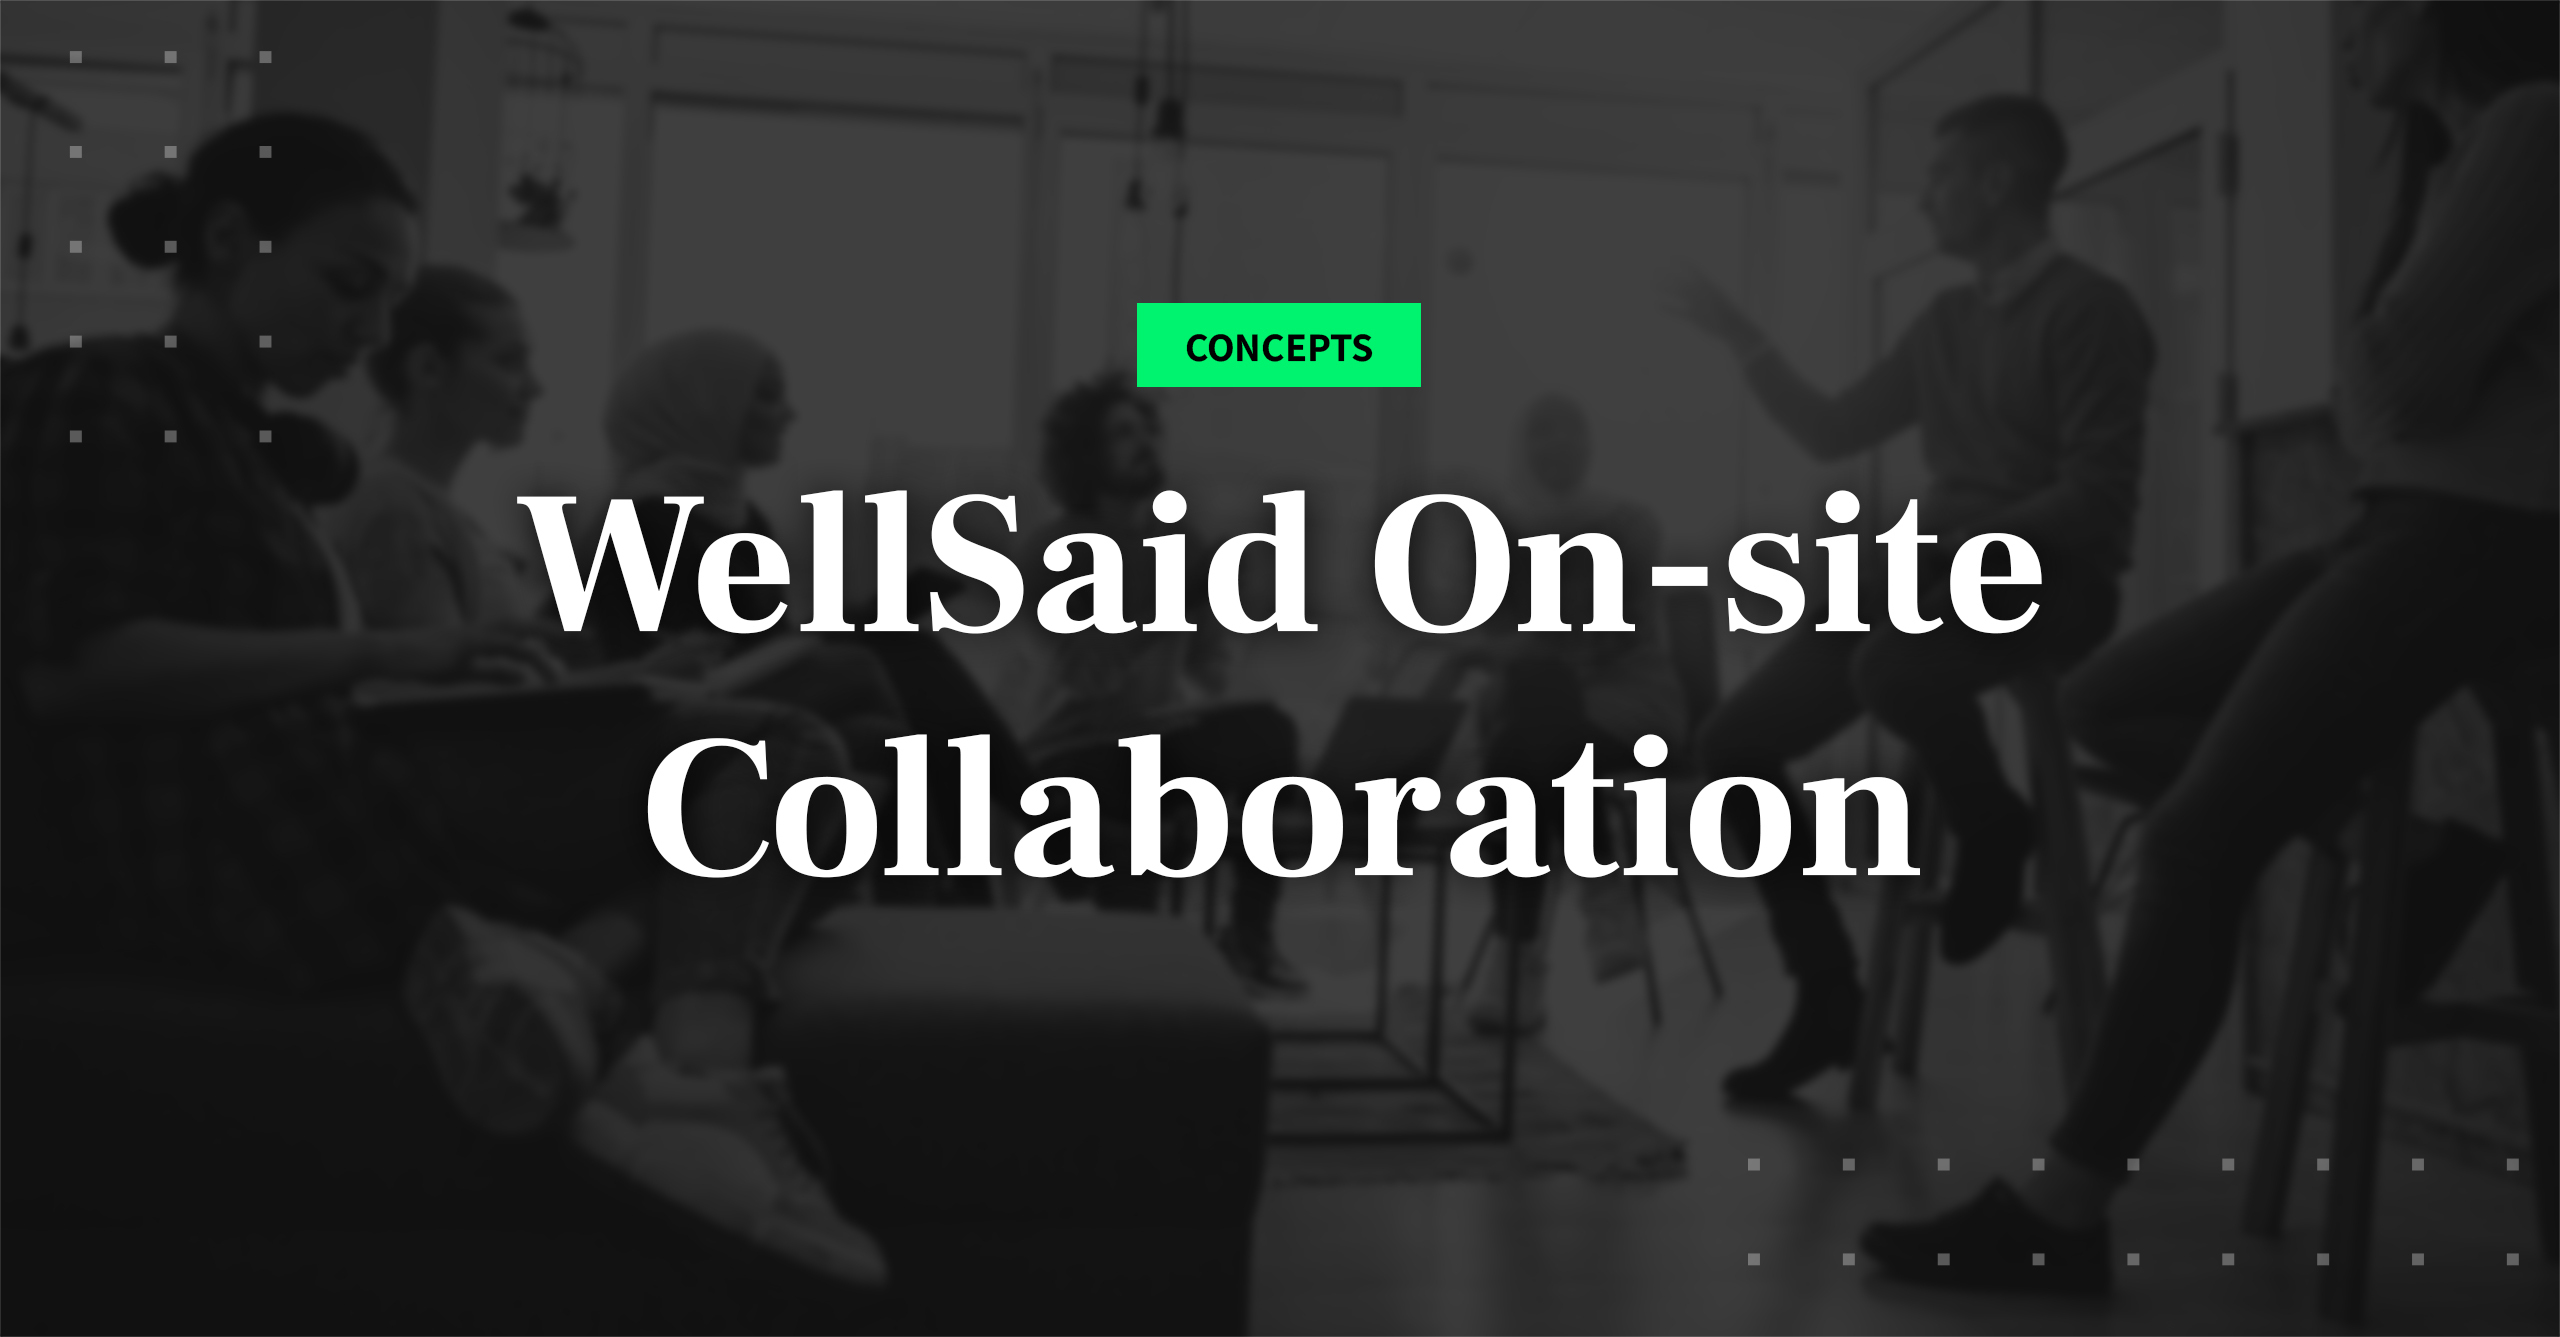 WellSaid Labs has regular onsites to connect on important issues.